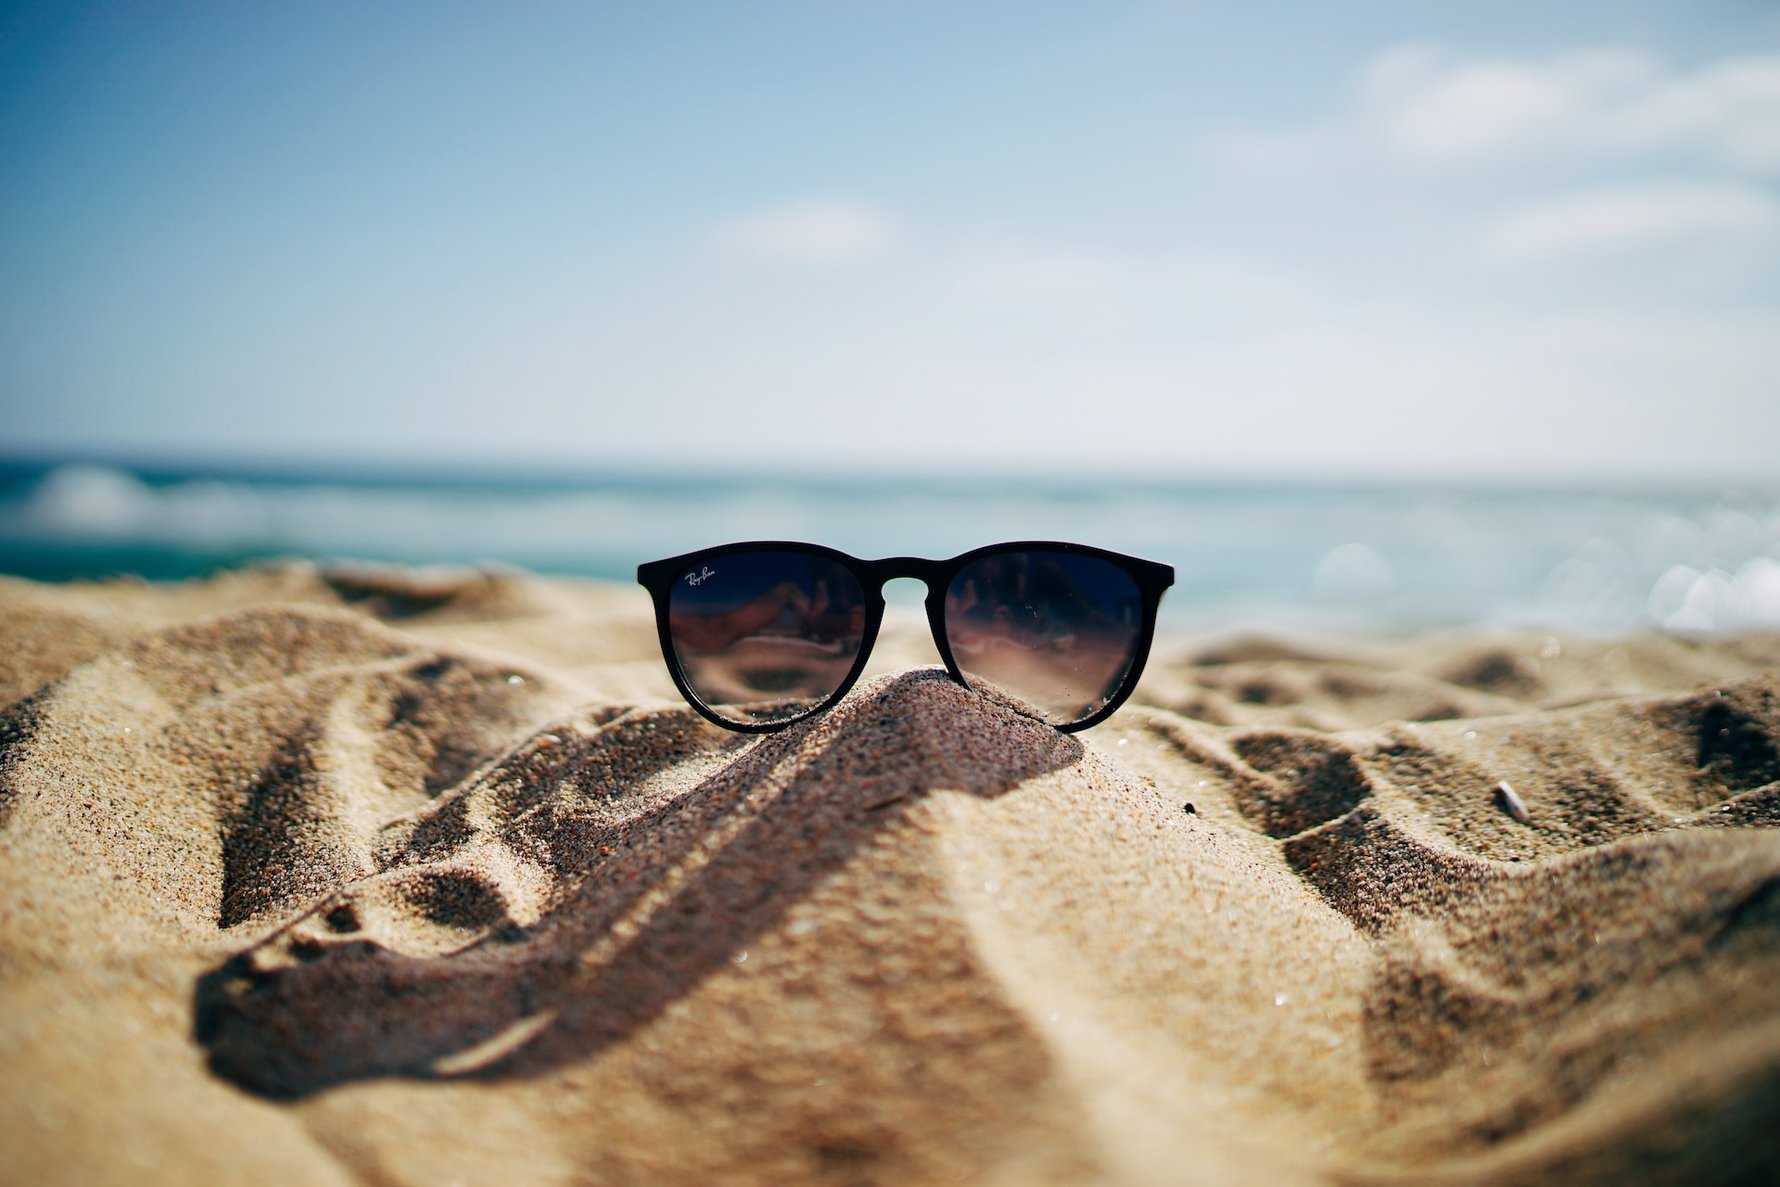 hit the jackpot this summer - slots with sunny themes © ethan-robertson-unsplash